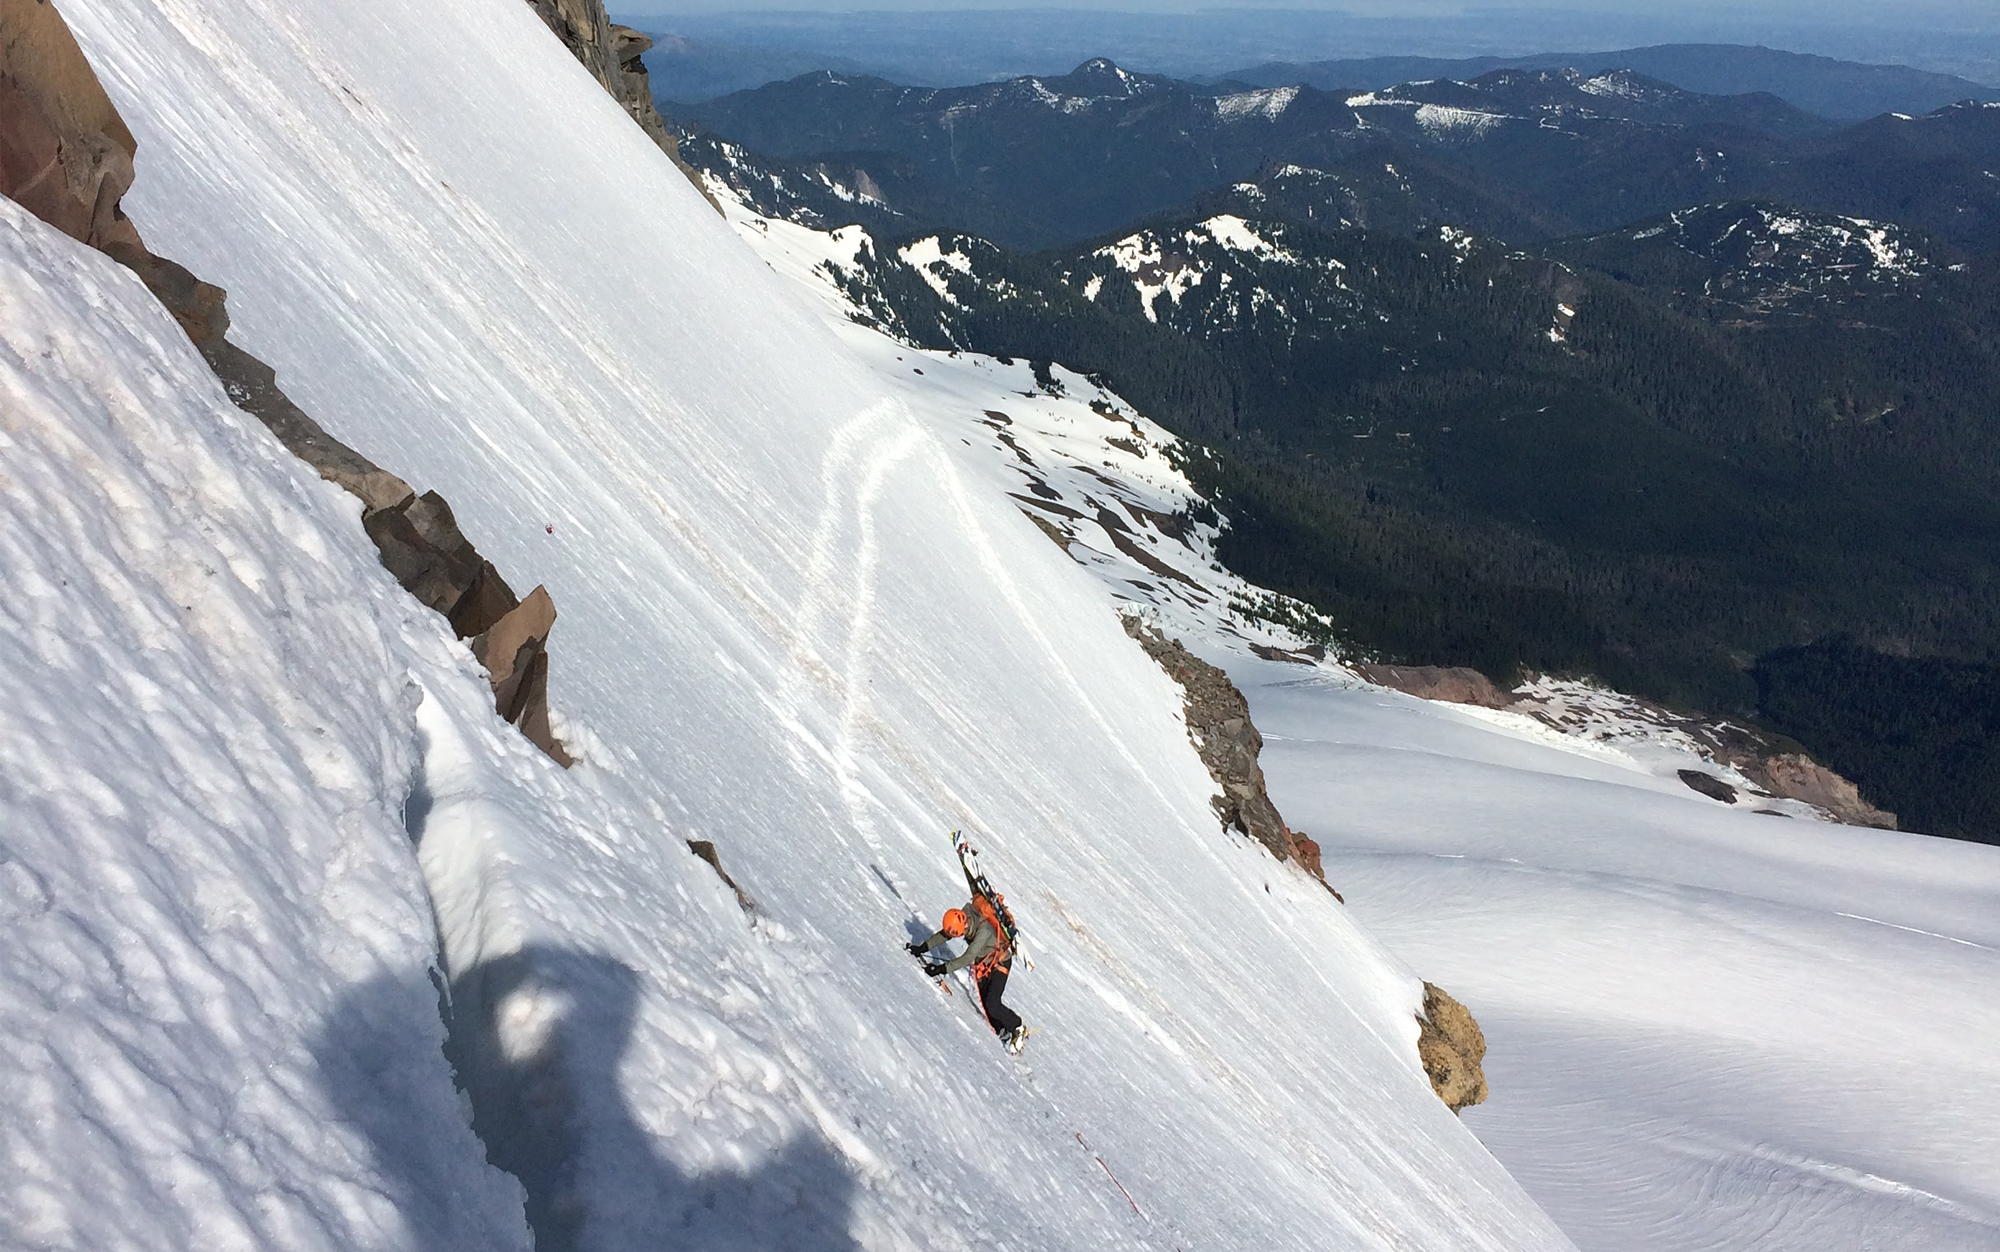 Skier uses the Black Diamond Nerve Pro to cross a steep and snowy section.